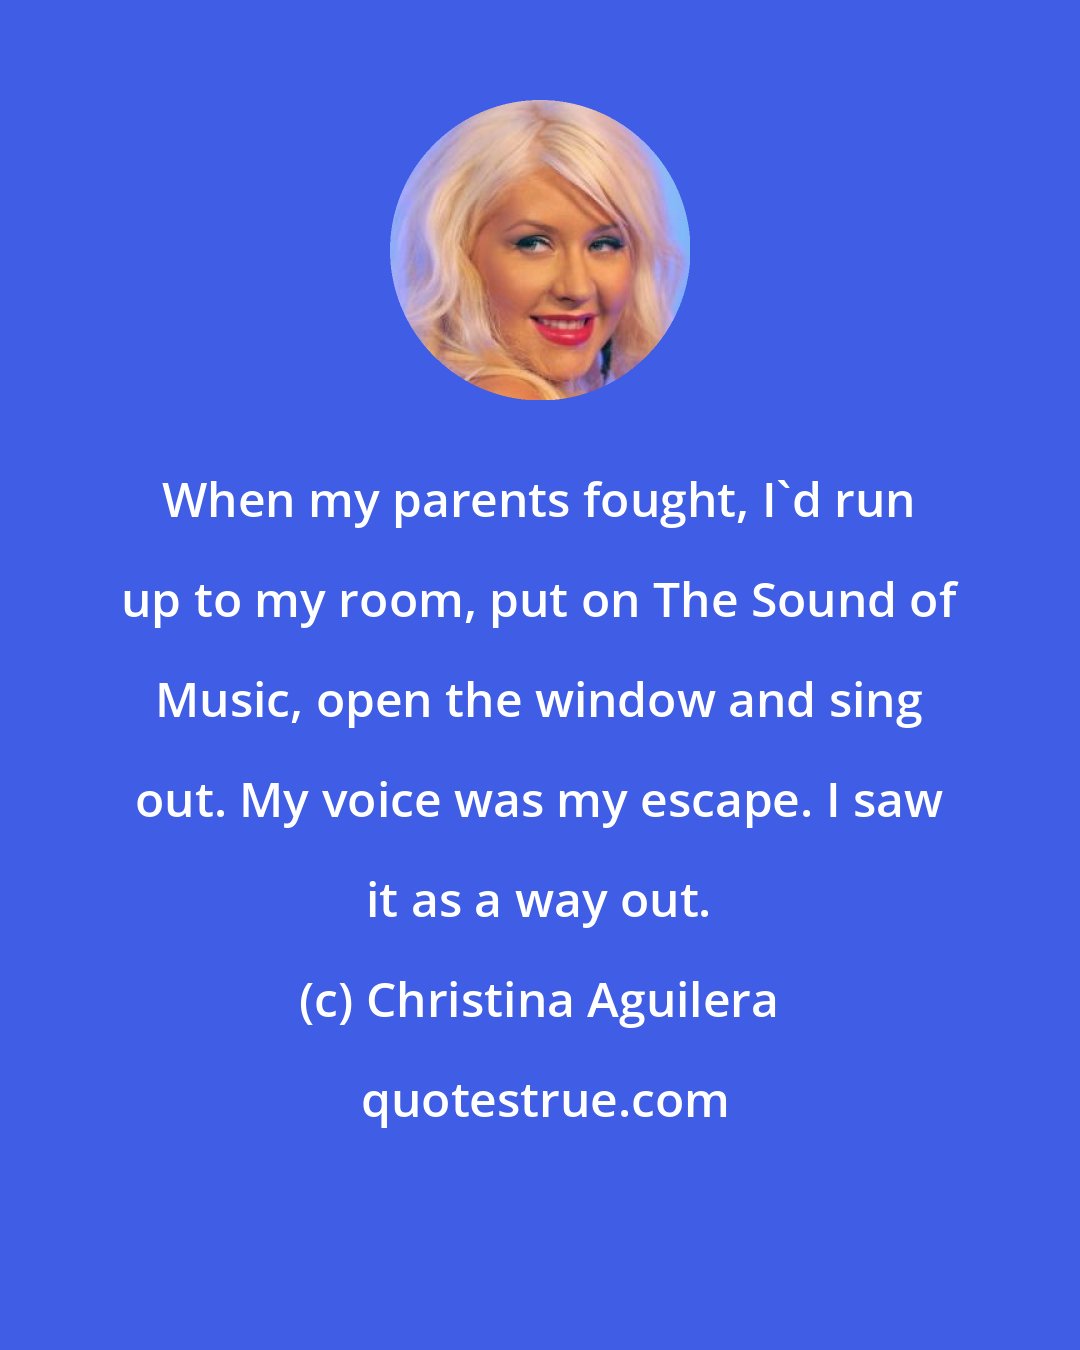 Christina Aguilera: When my parents fought, I'd run up to my room, put on The Sound of Music, open the window and sing out. My voice was my escape. I saw it as a way out.